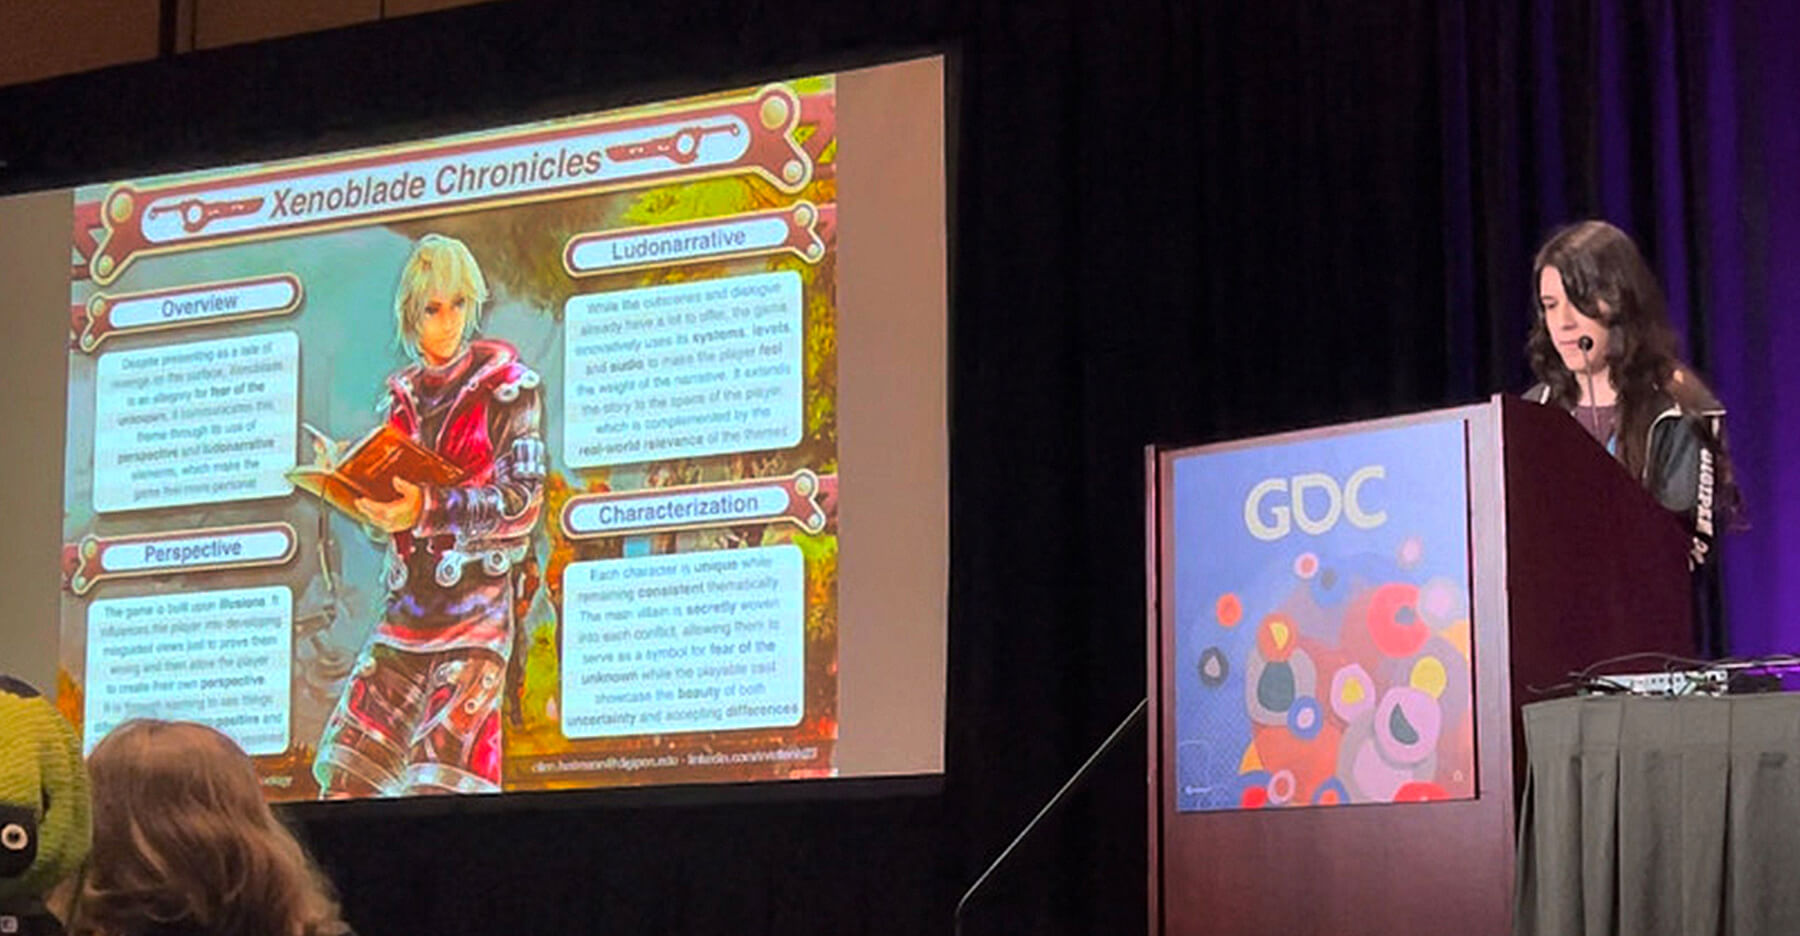 Ellen Heitmann presents at a GDC-branded podium next to a projector screen displaying her Xenoblade Chronicles analysis.